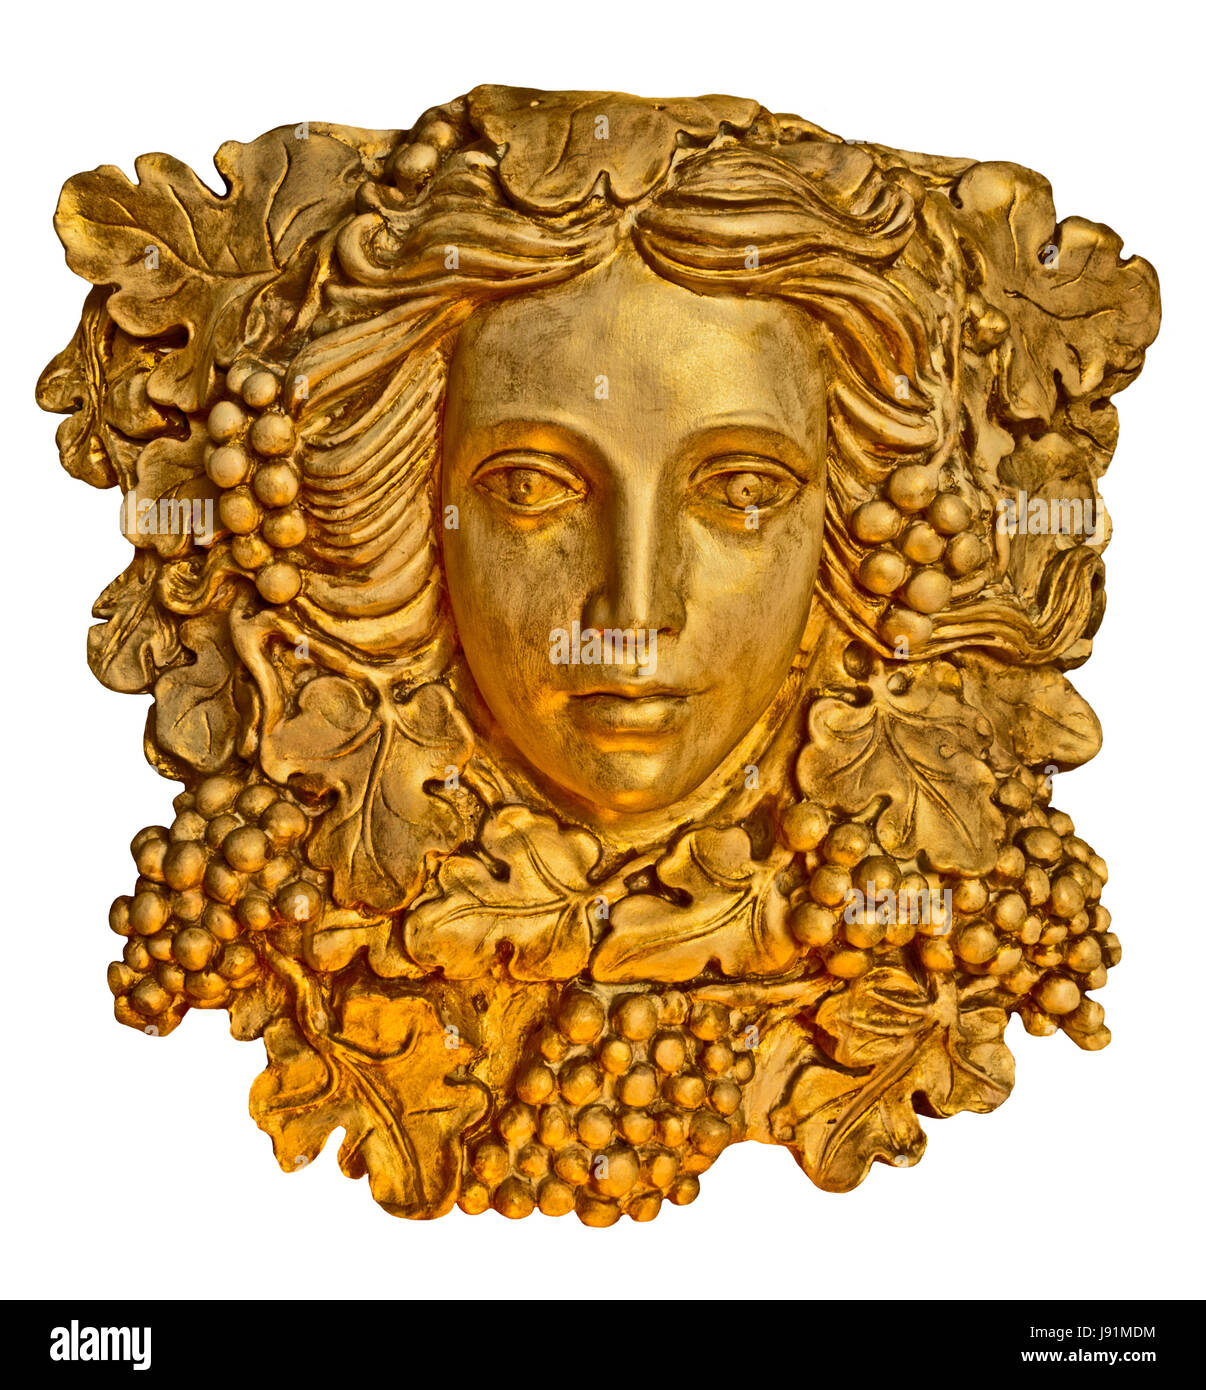 Greek maiden bust head statue with grapes, leaves in gold leaf texture Stock Photo